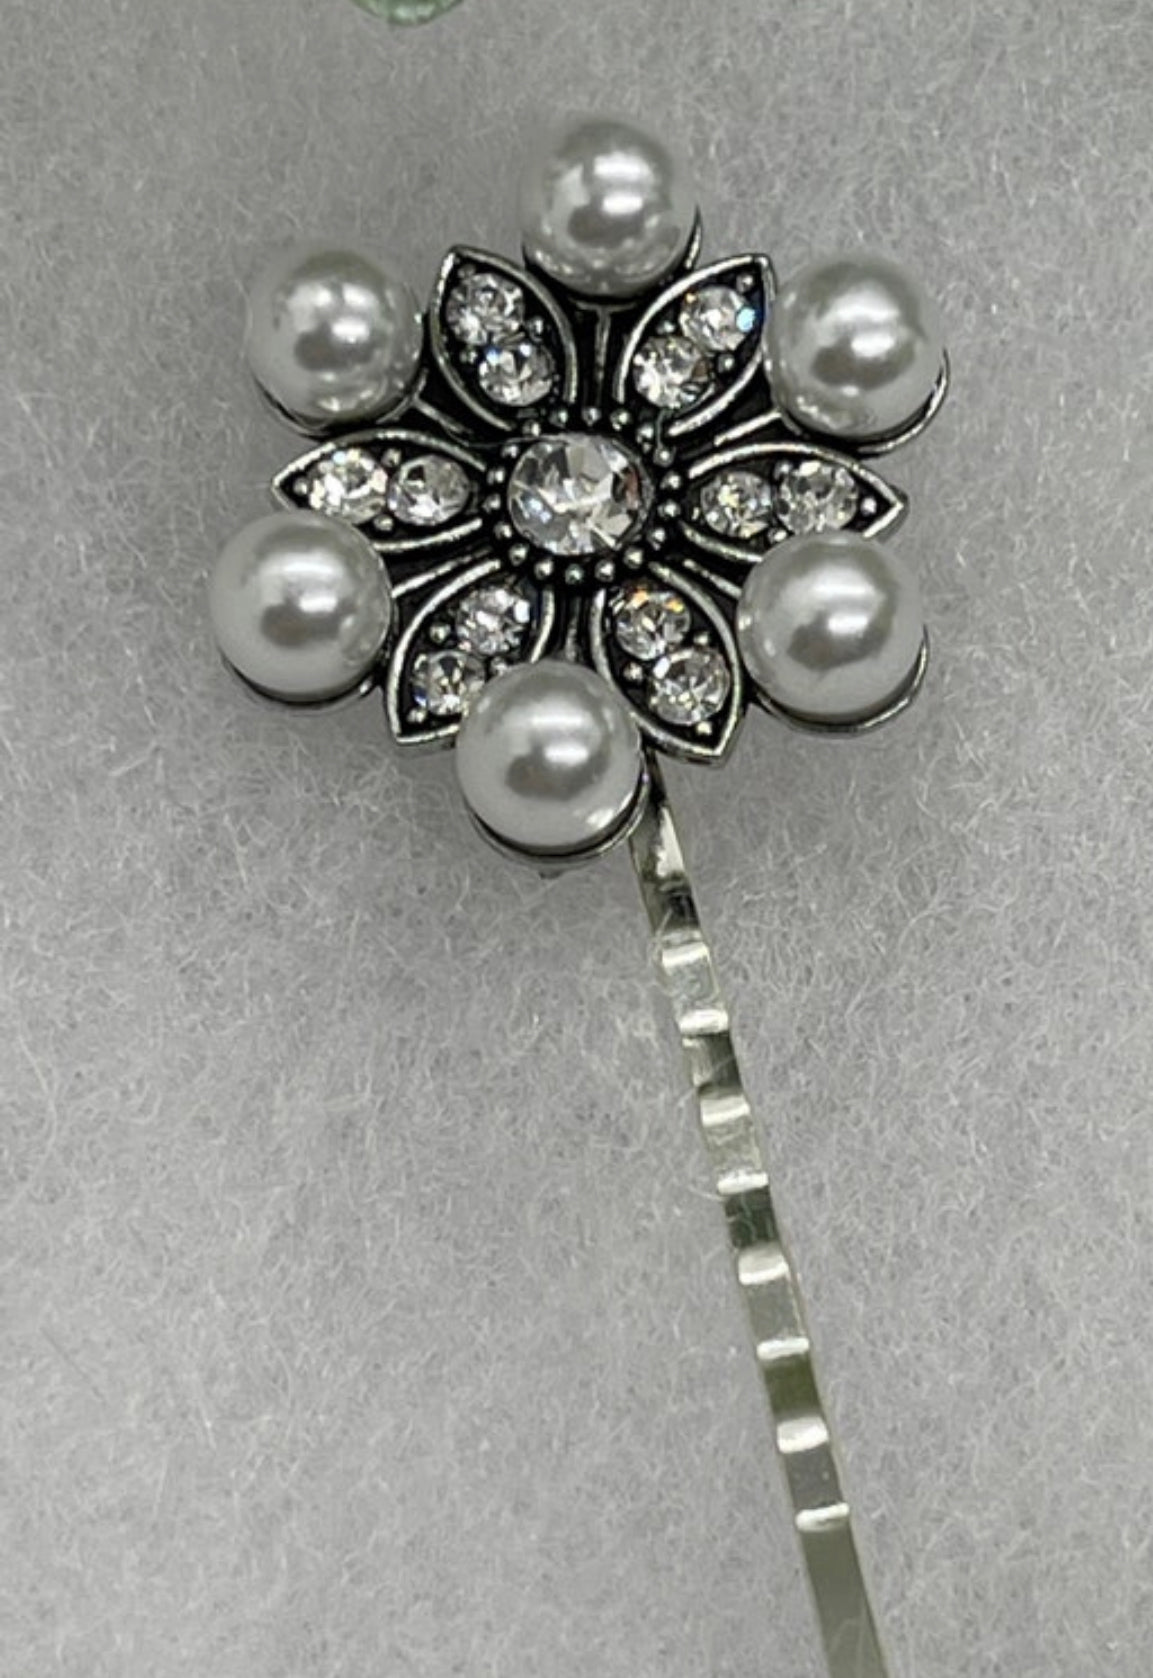 Pearl Crystal vintage antique style hair pin approximately 2.5” long Handmade hair accessory bridal wedding Retro